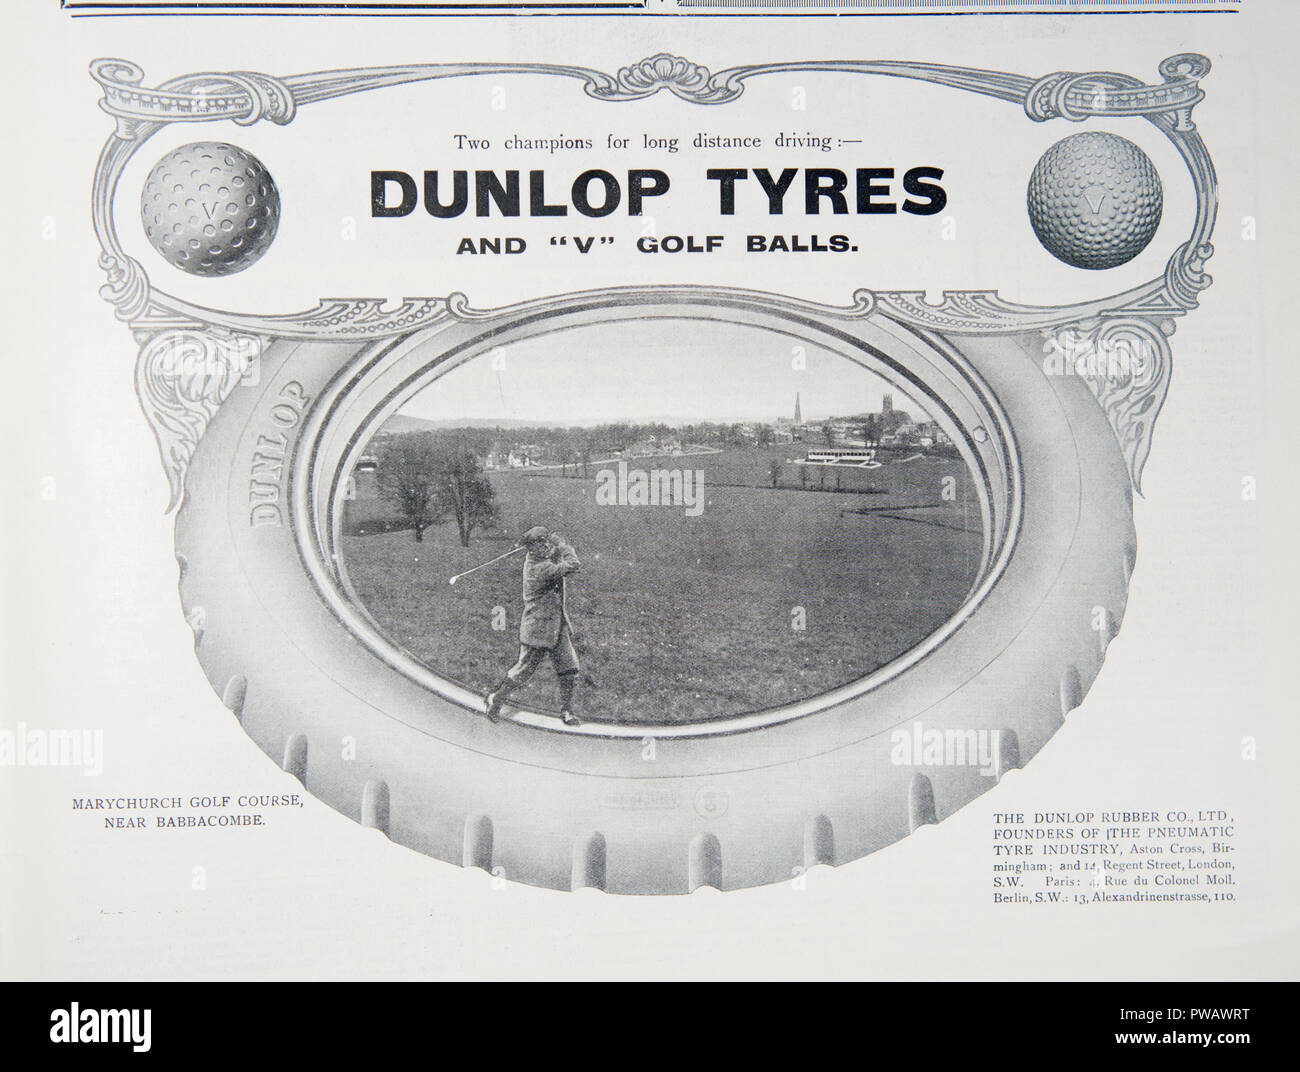 An advert for Dunlop tyres and golfballs. From an old magazine from the 1914-1918 period. England UK GB Stock Photo